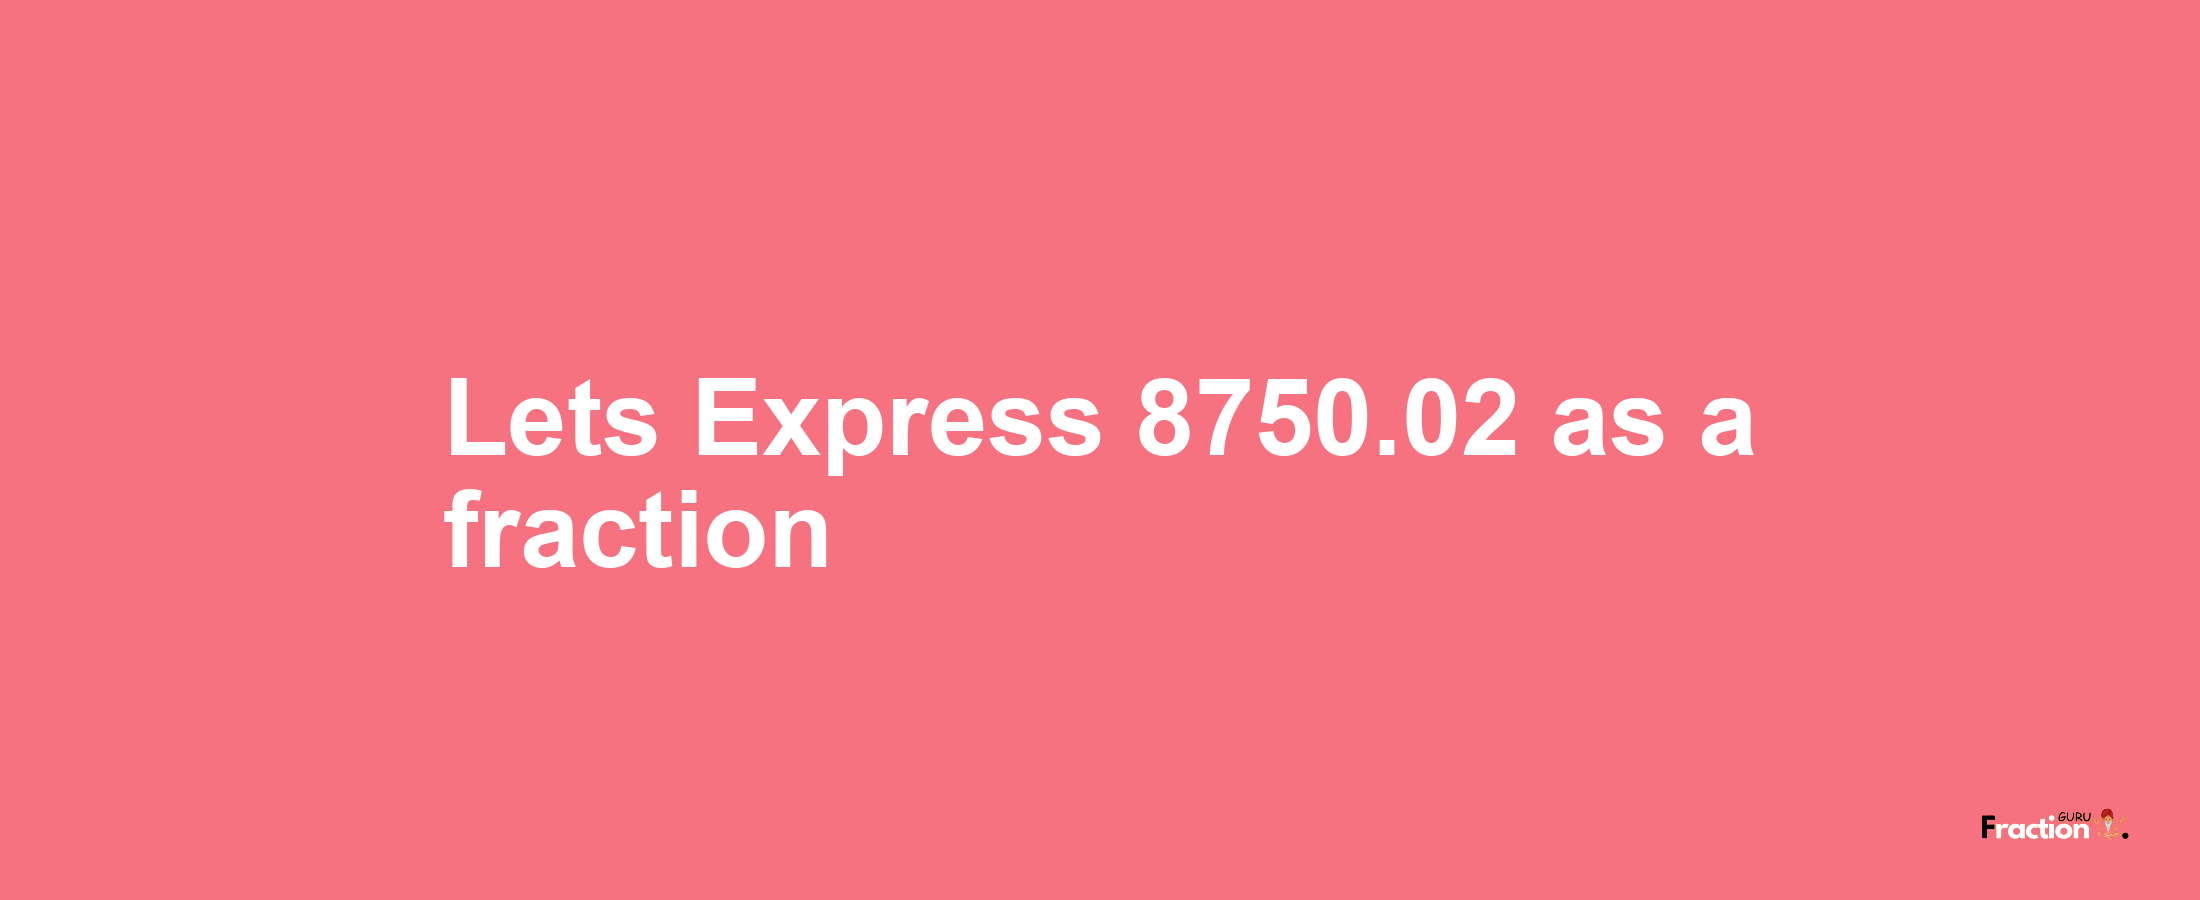 Lets Express 8750.02 as afraction